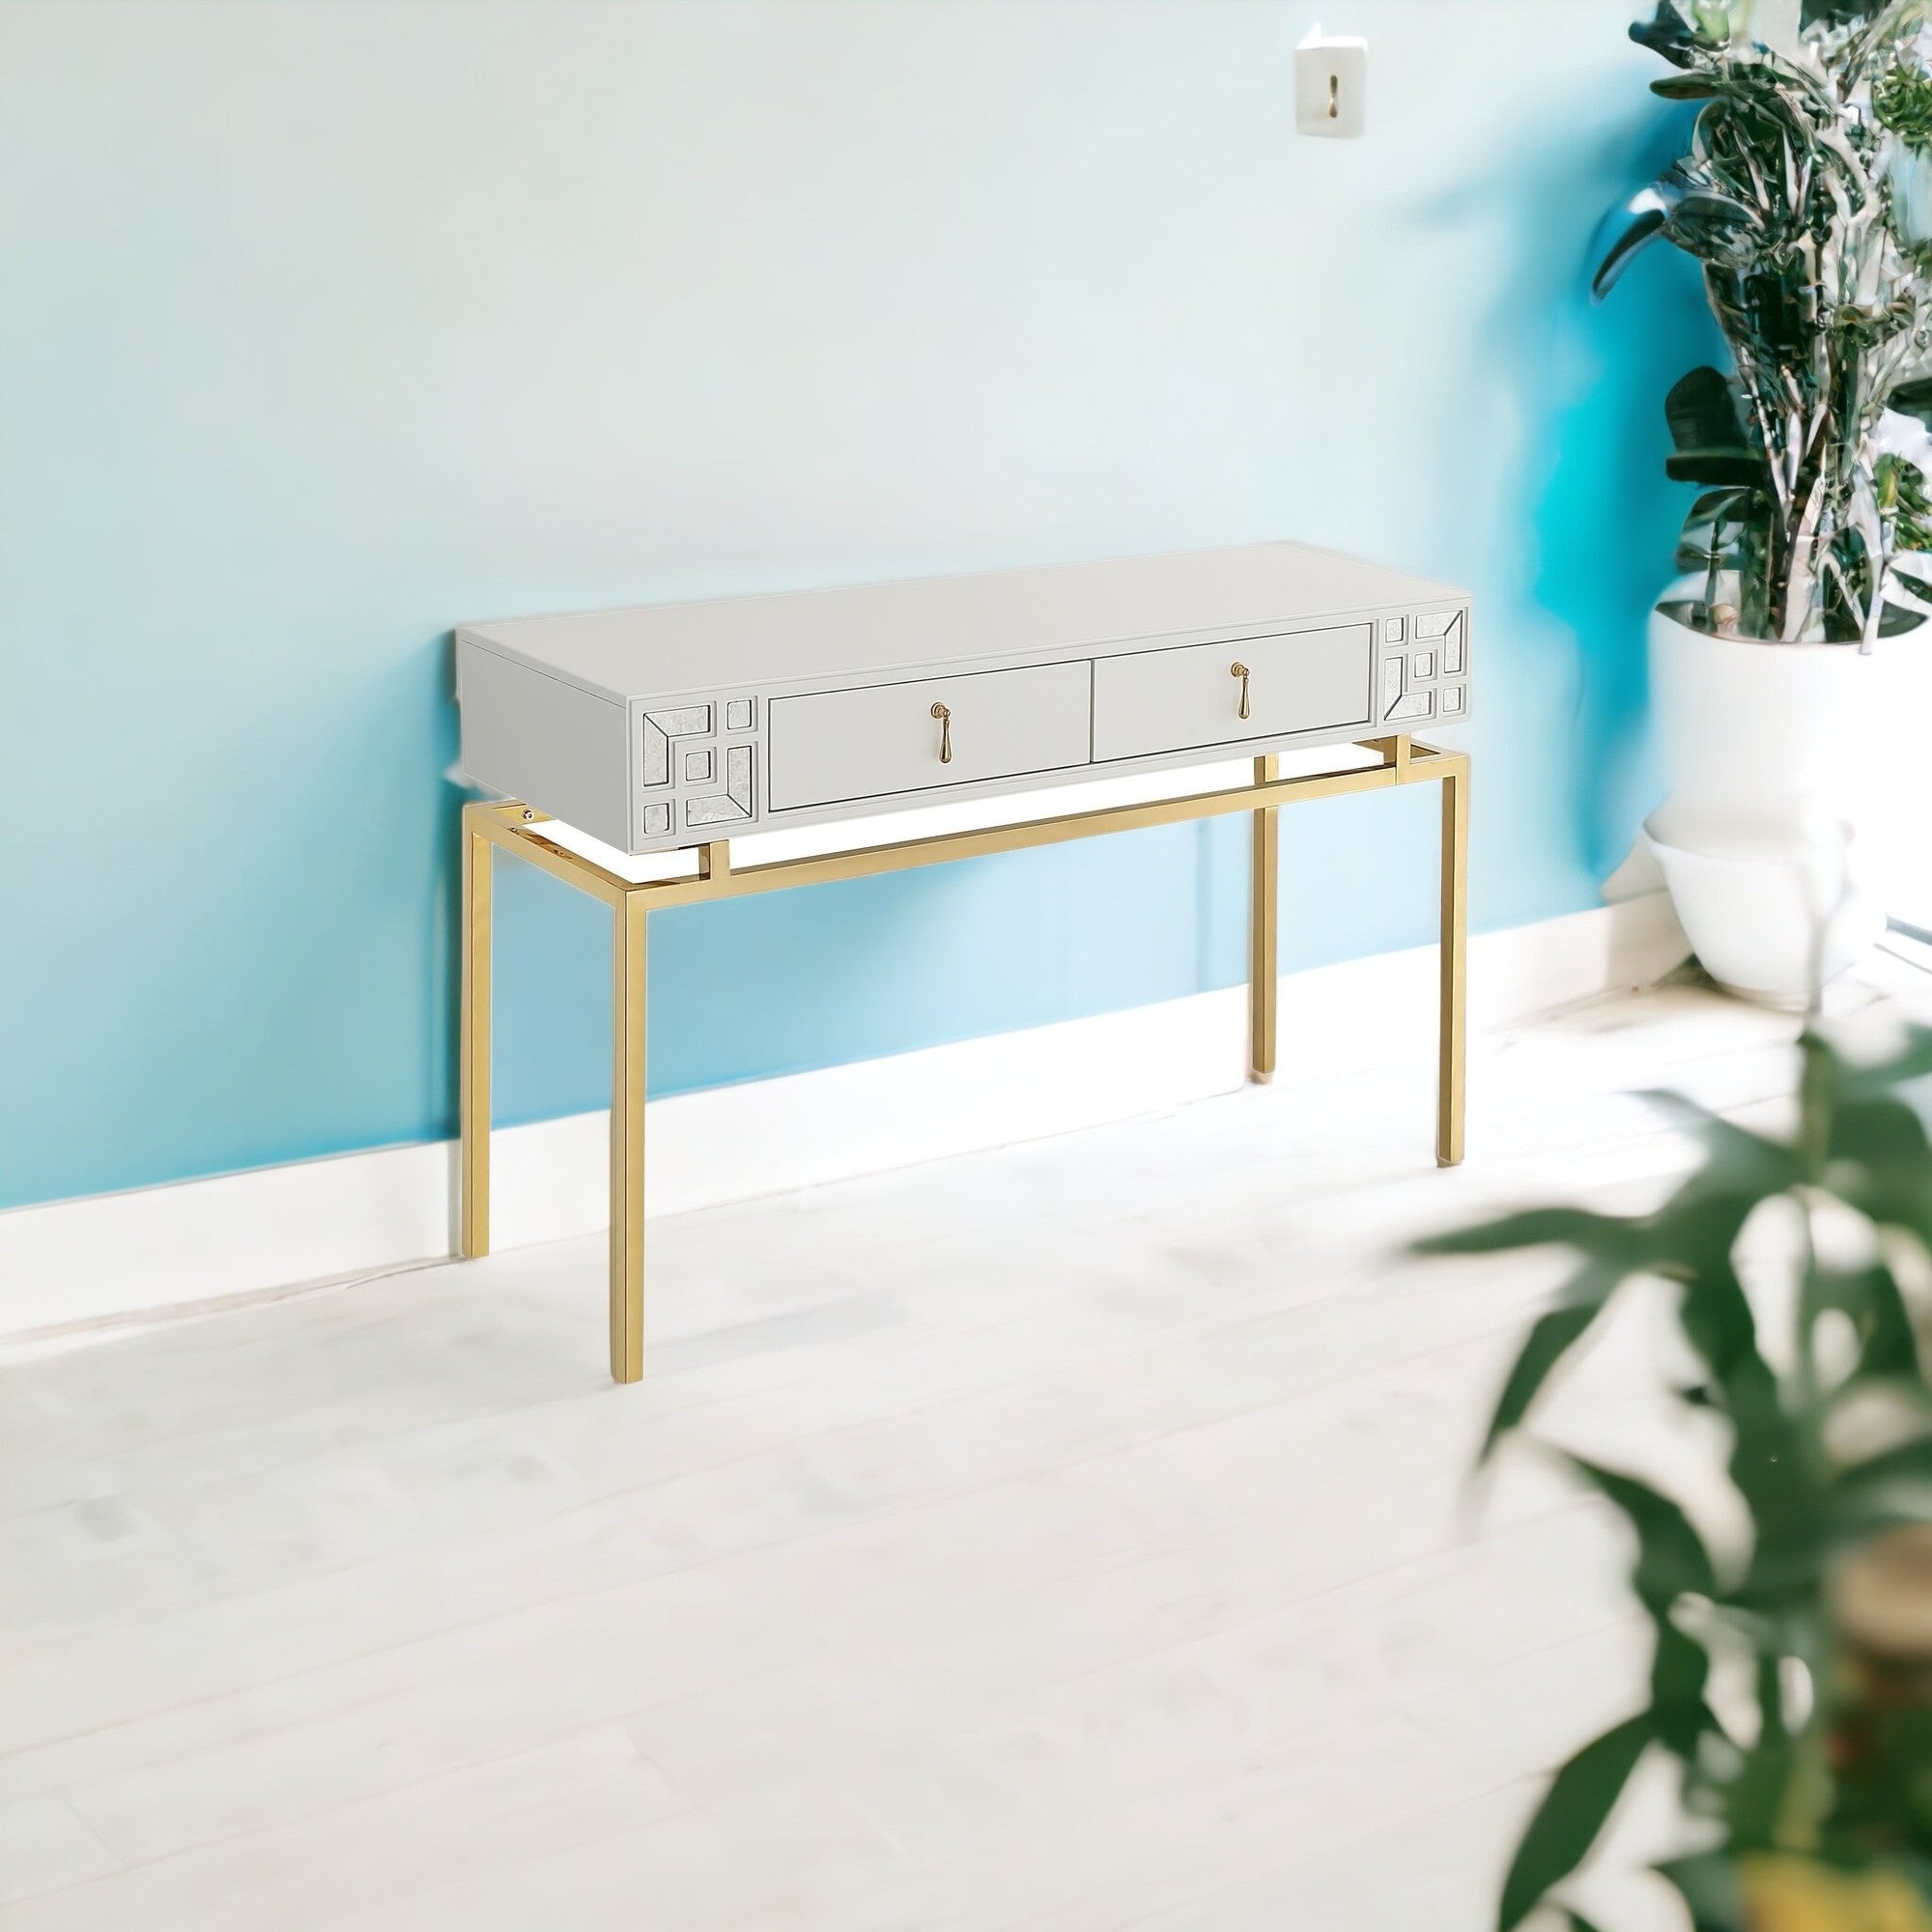 47" White and Gold Wood and Manufactured Wood Blend Mirrored Console Table With Storage